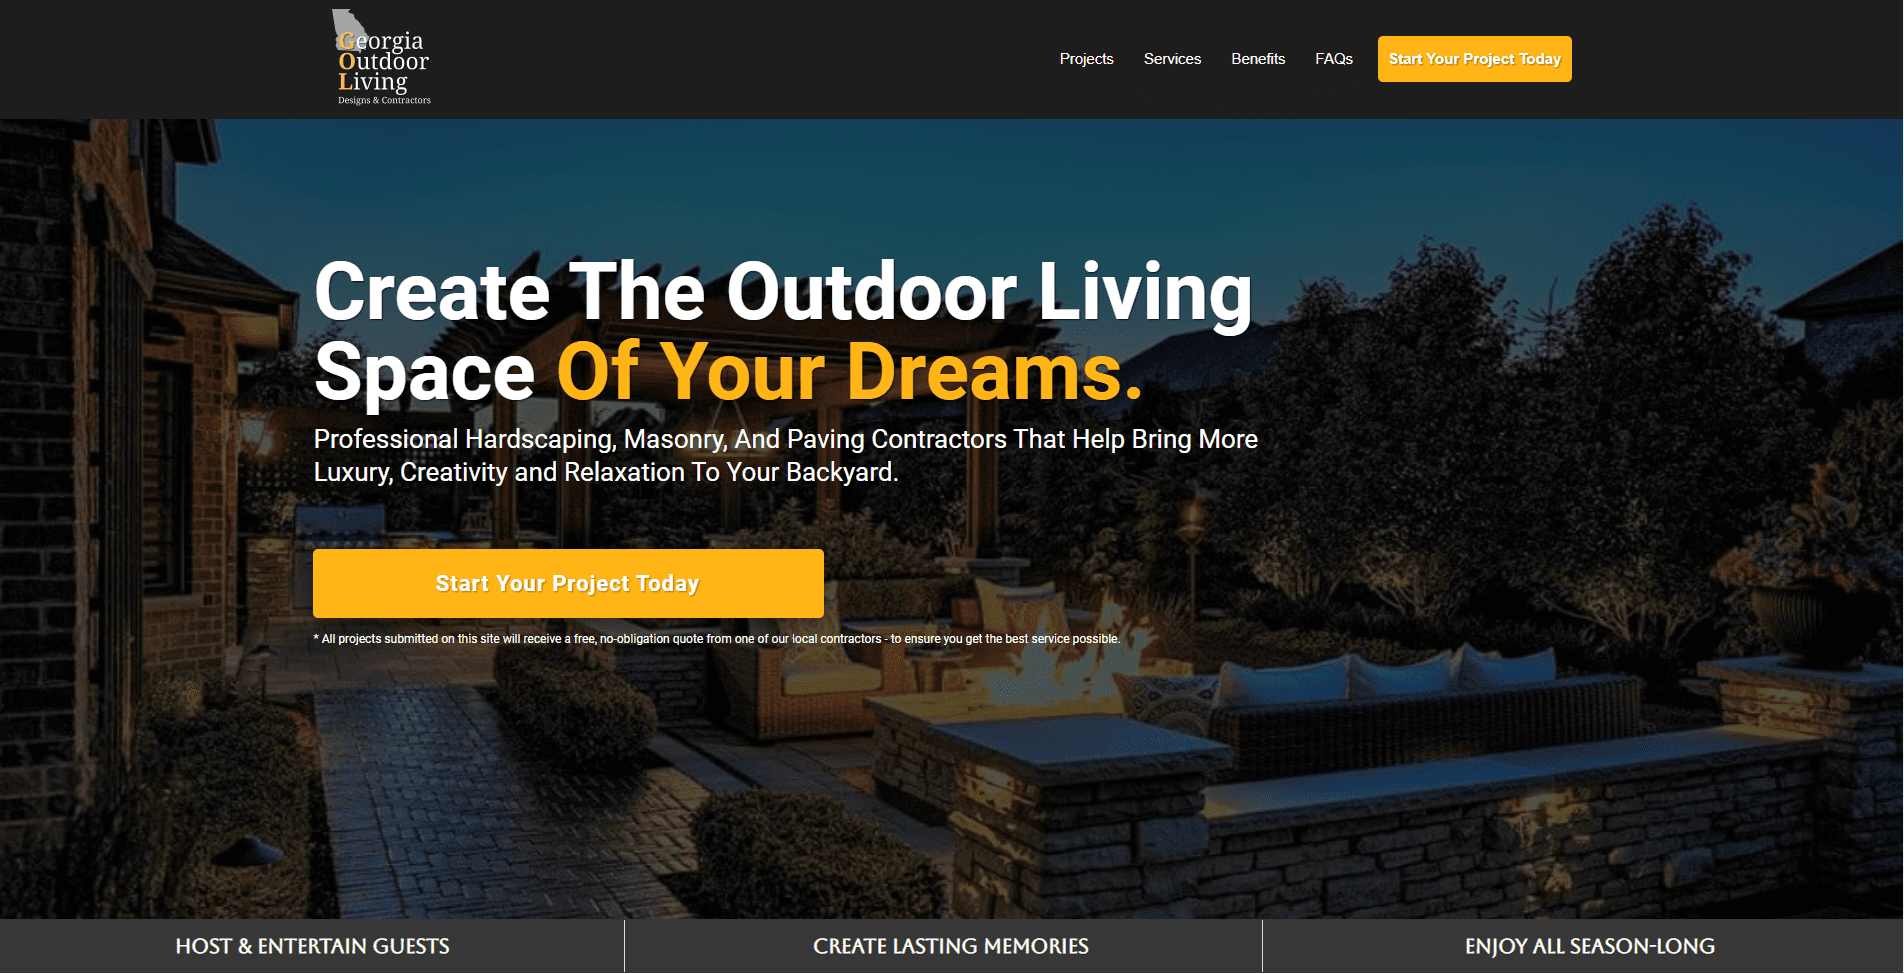 A Professionally Designed WordPress Website Built As A Lead Generation Asset For An Outdoor Living, Hardscaping, And Masonry Contractor Business In Georgia